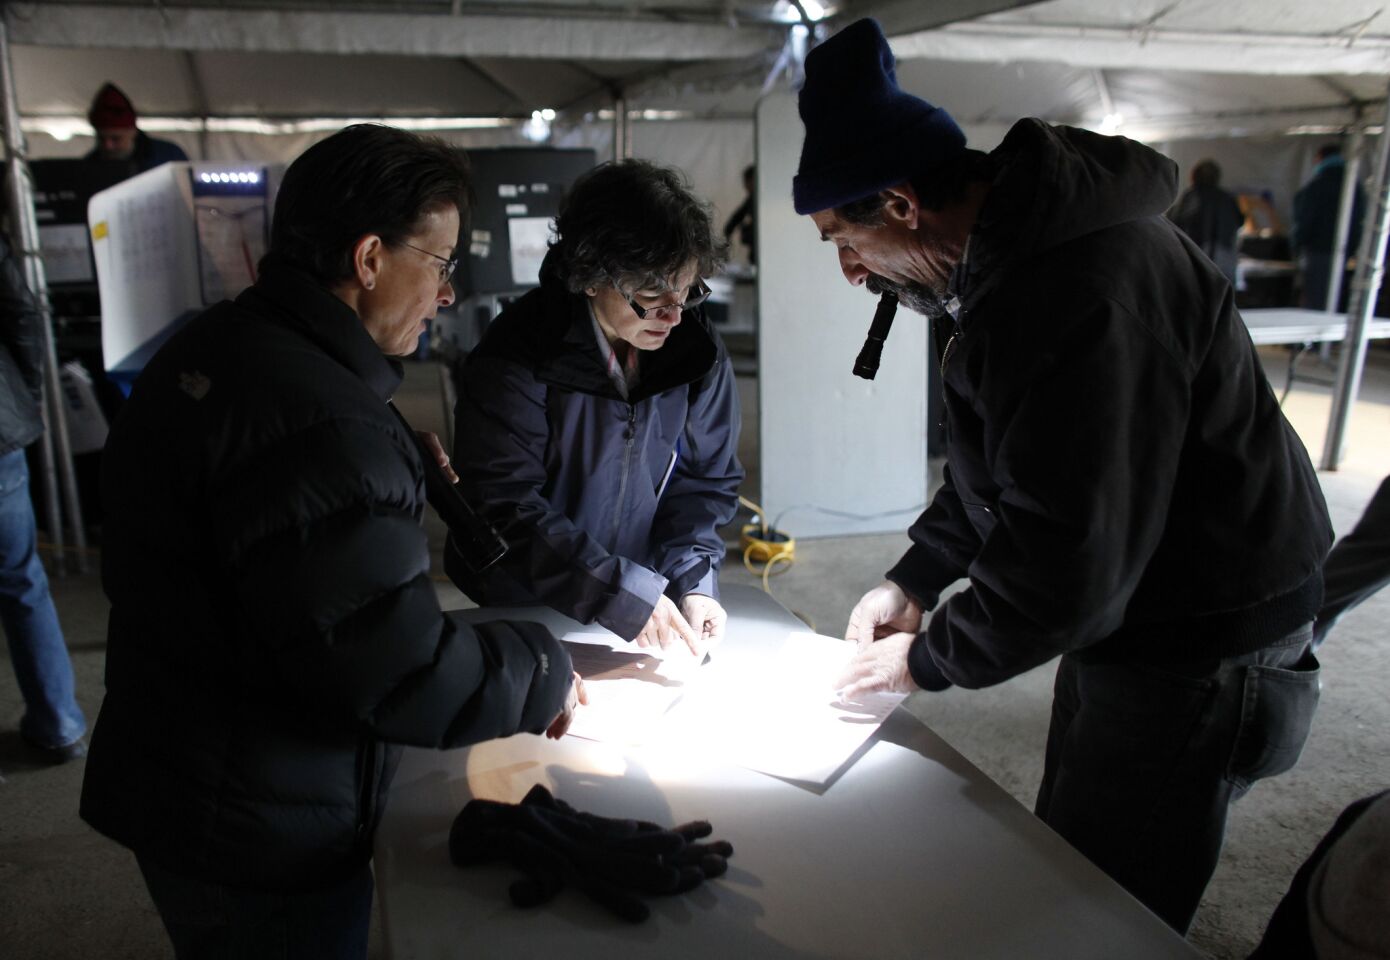 Election workers help a voter, right, finalize his affidavit ballot at a consolidated polling station for residents of the Rockaways on Election Day in the Queens borough of New York.